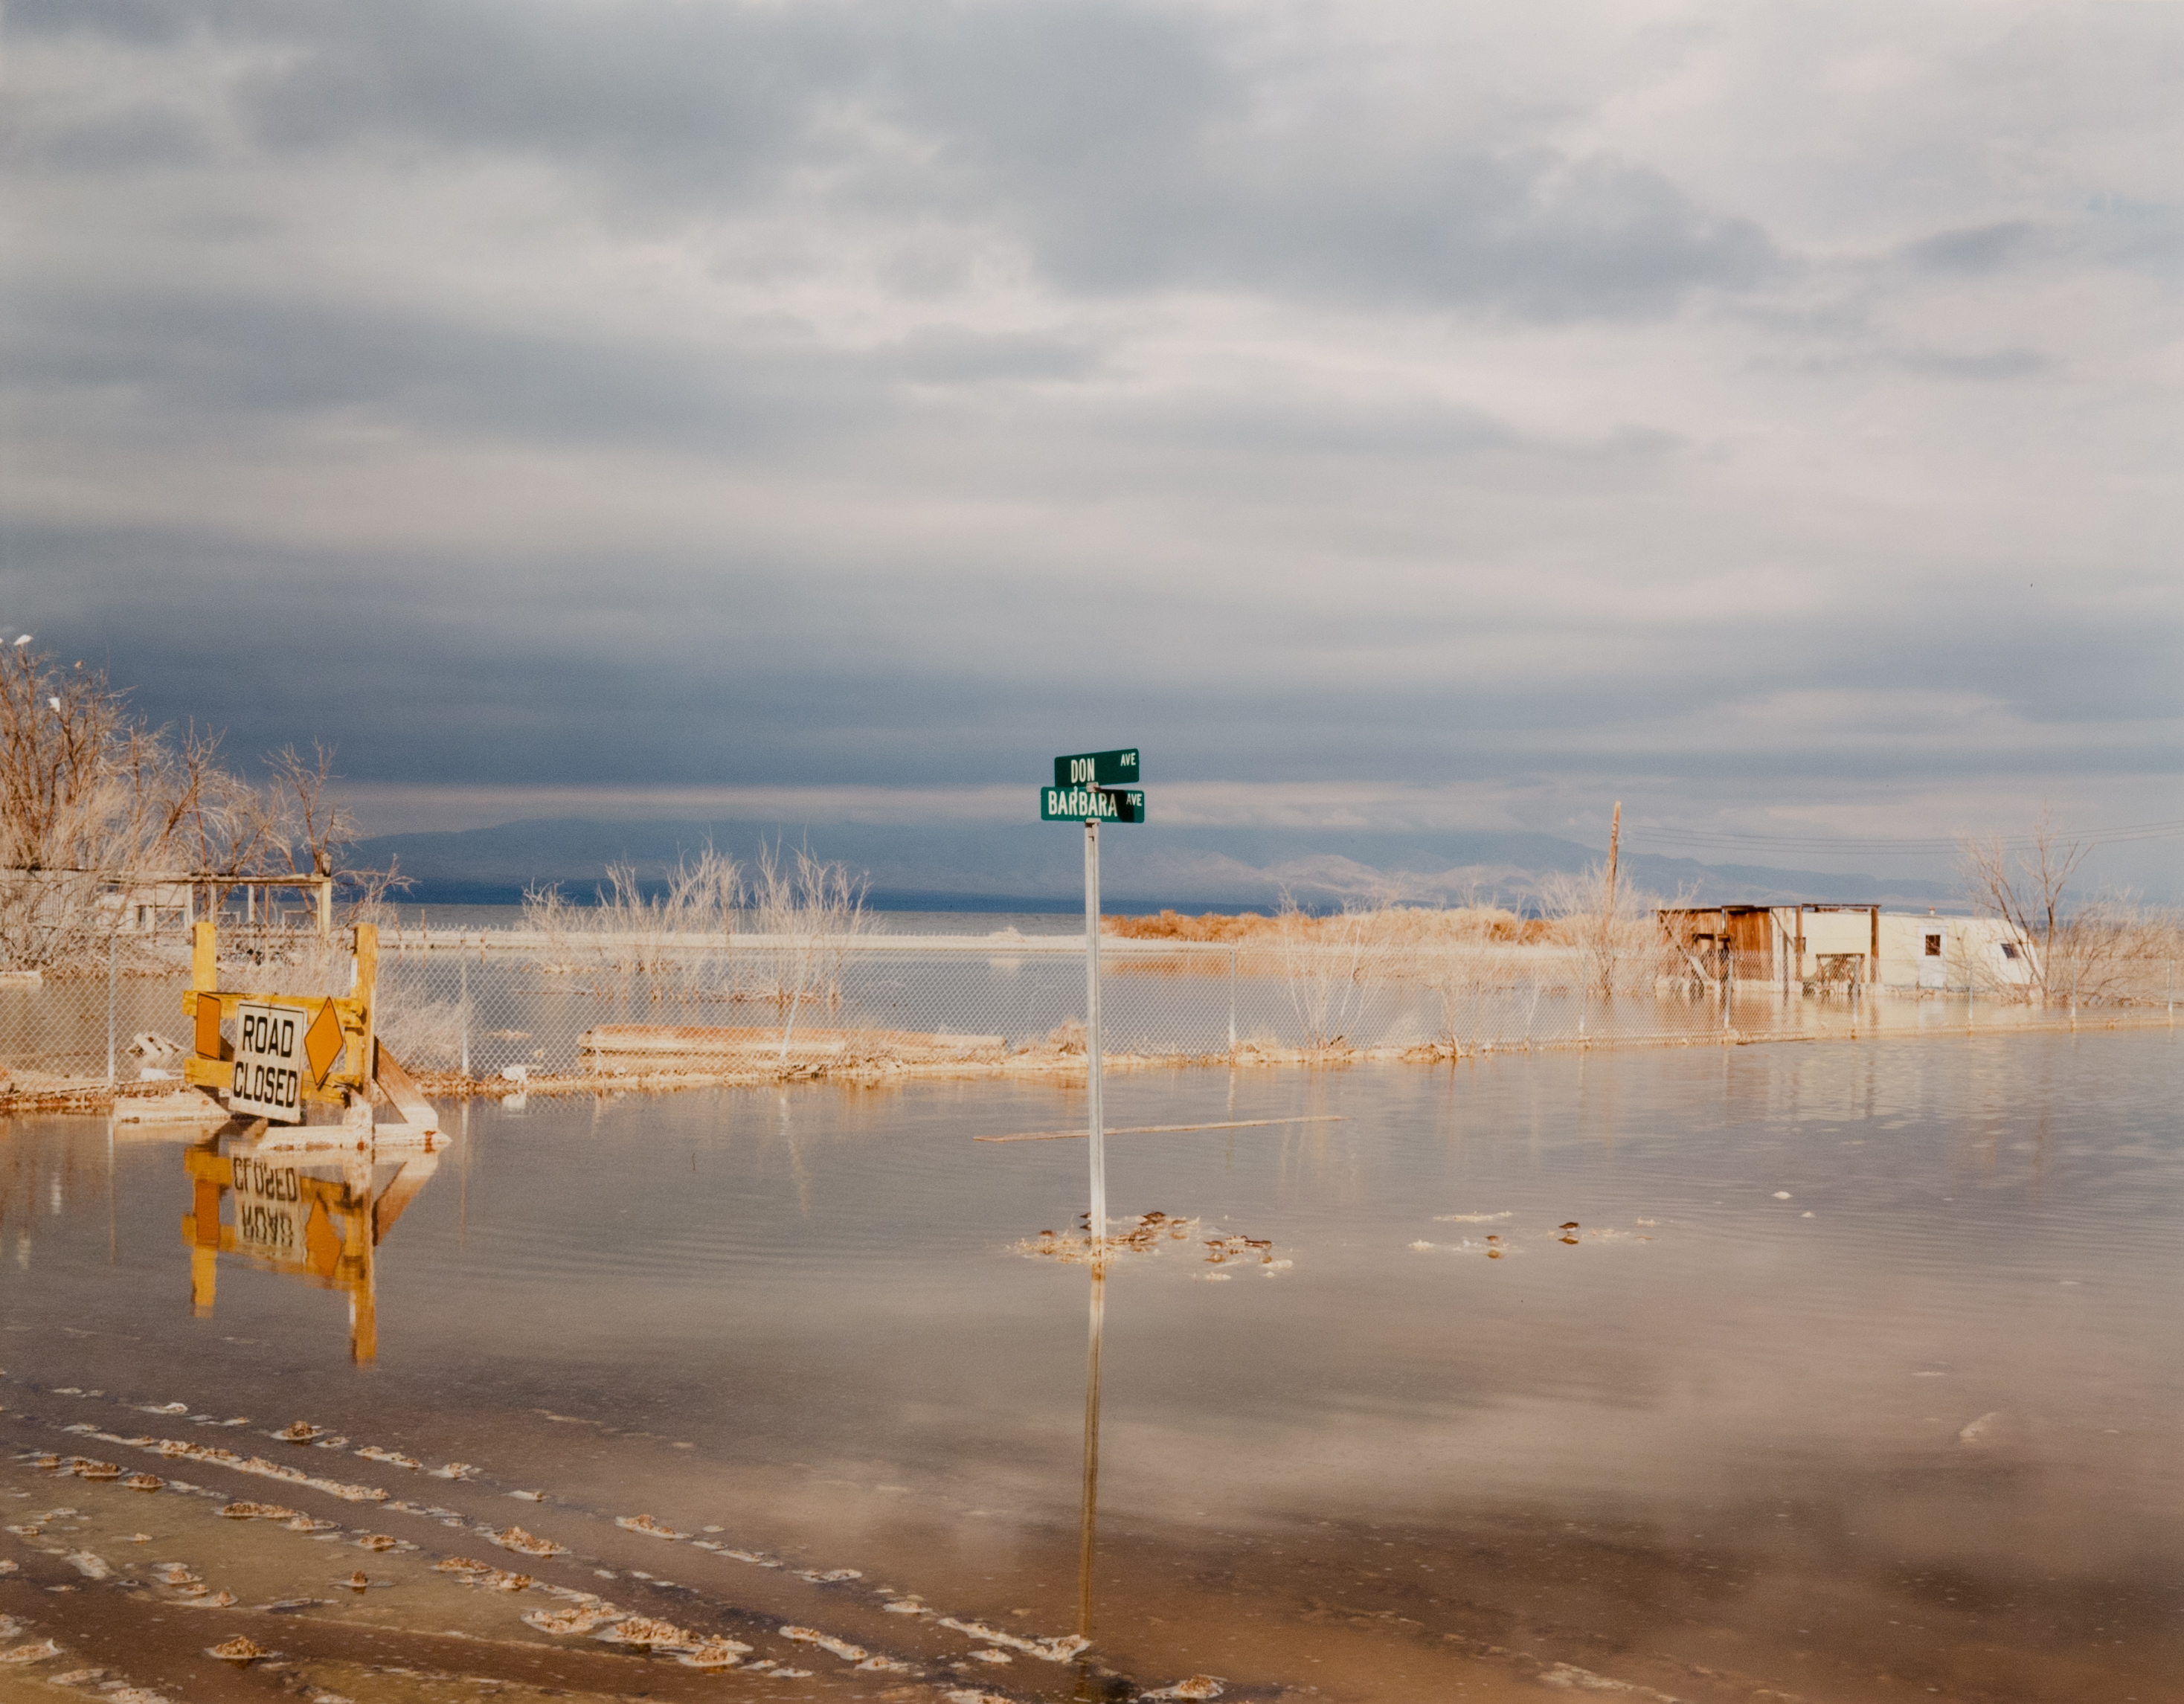 Color photograph of a submerged street with a street sign in the center and mountain range on the horizon